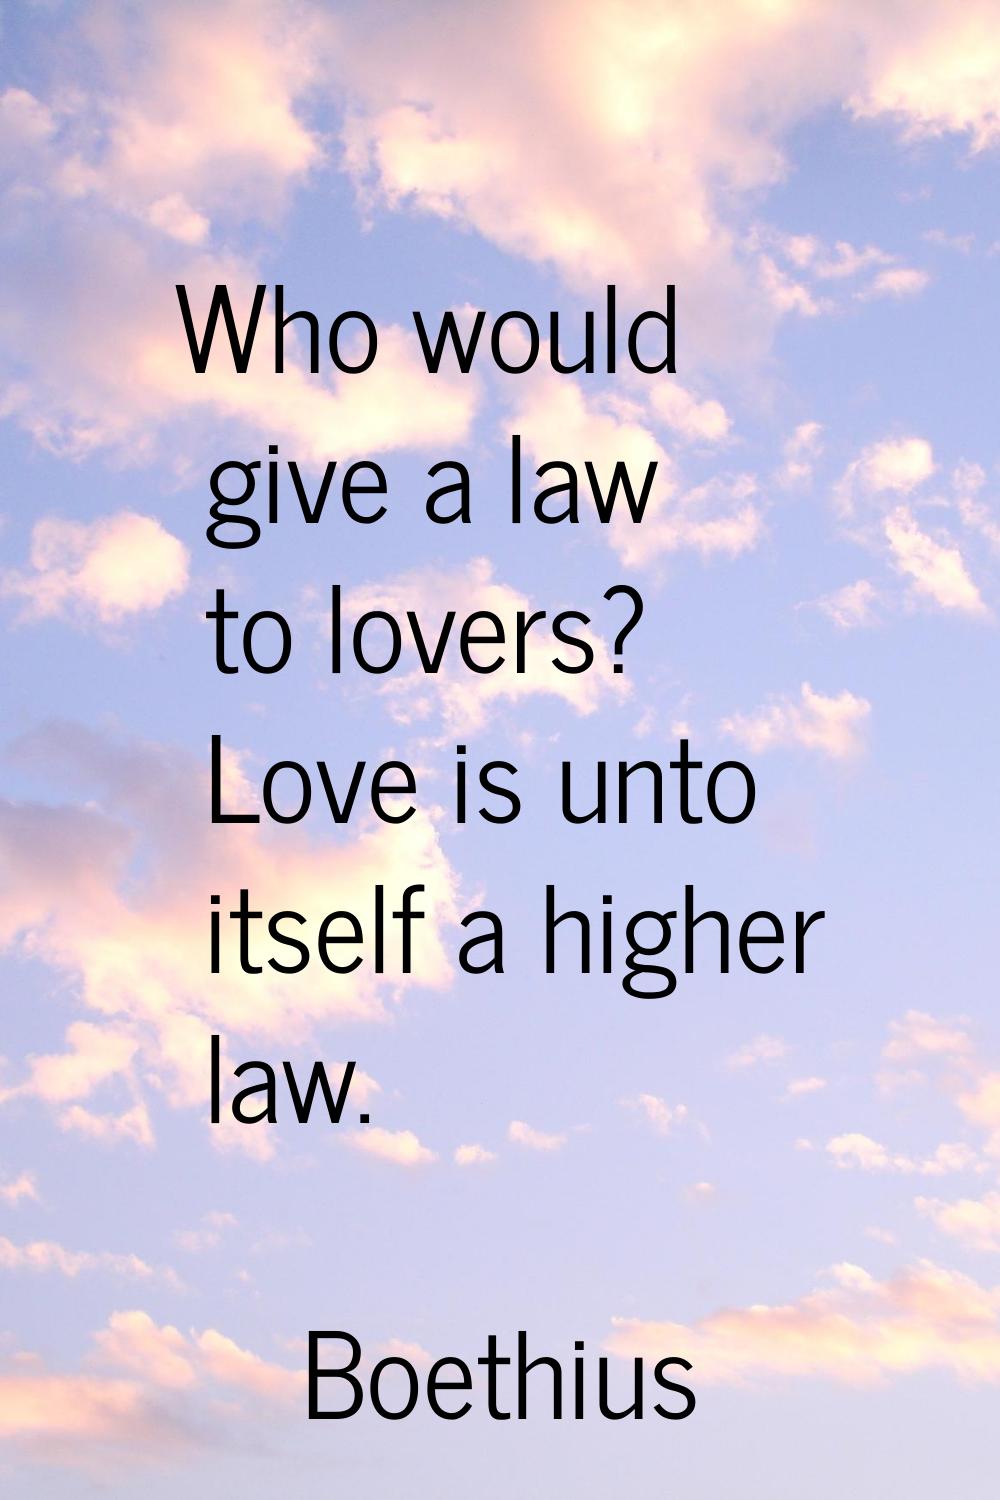 Who would give a law to lovers? Love is unto itself a higher law.